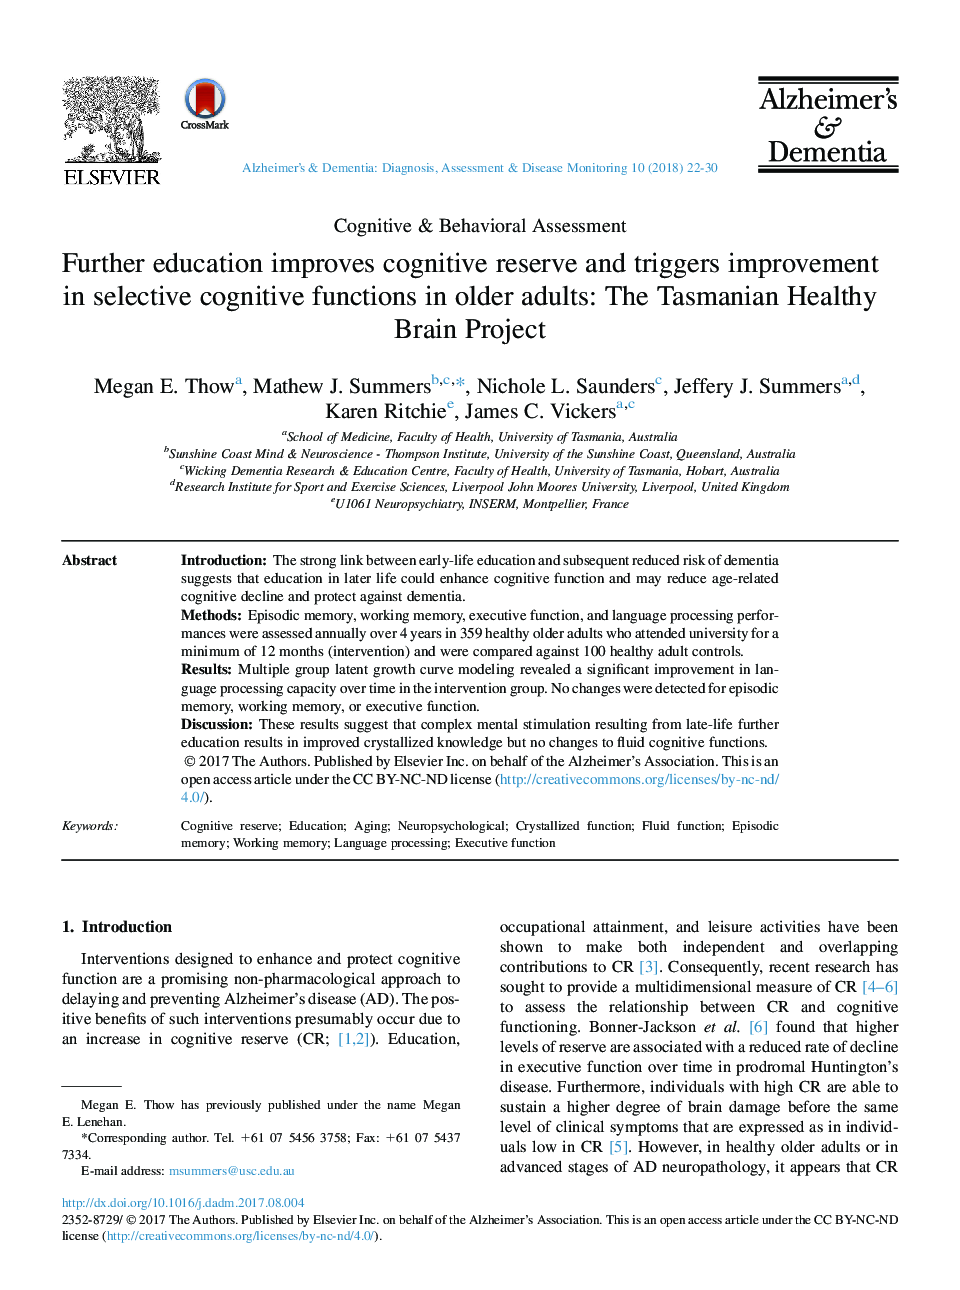 Further education improves cognitive reserve and triggers improvement in selective cognitive functions in older adults: The Tasmanian Healthy Brain Project